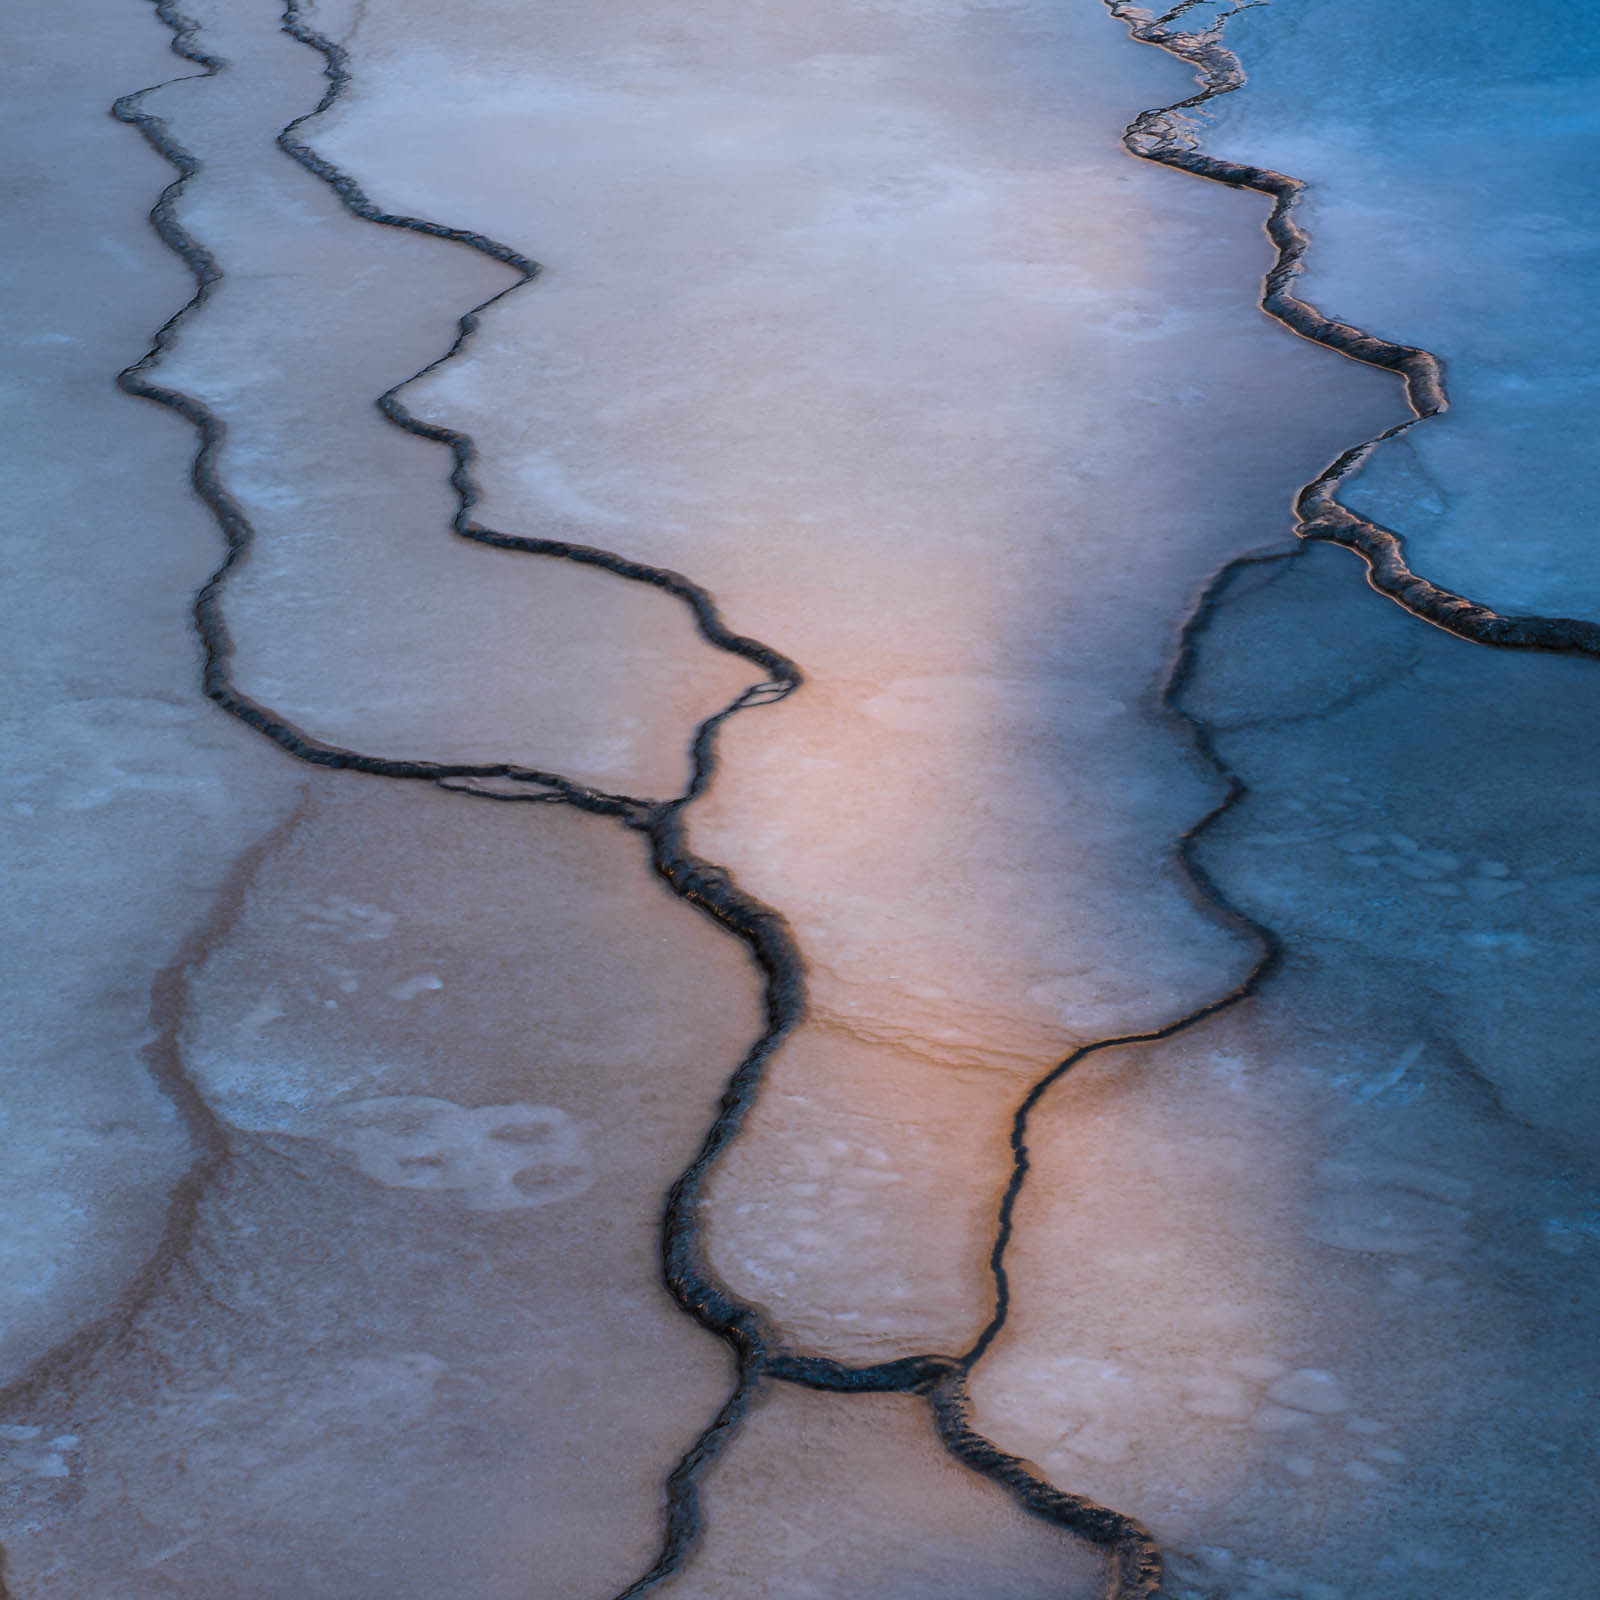 Abstract thermal feature at Grand Prismatic in Yellowstone National Park